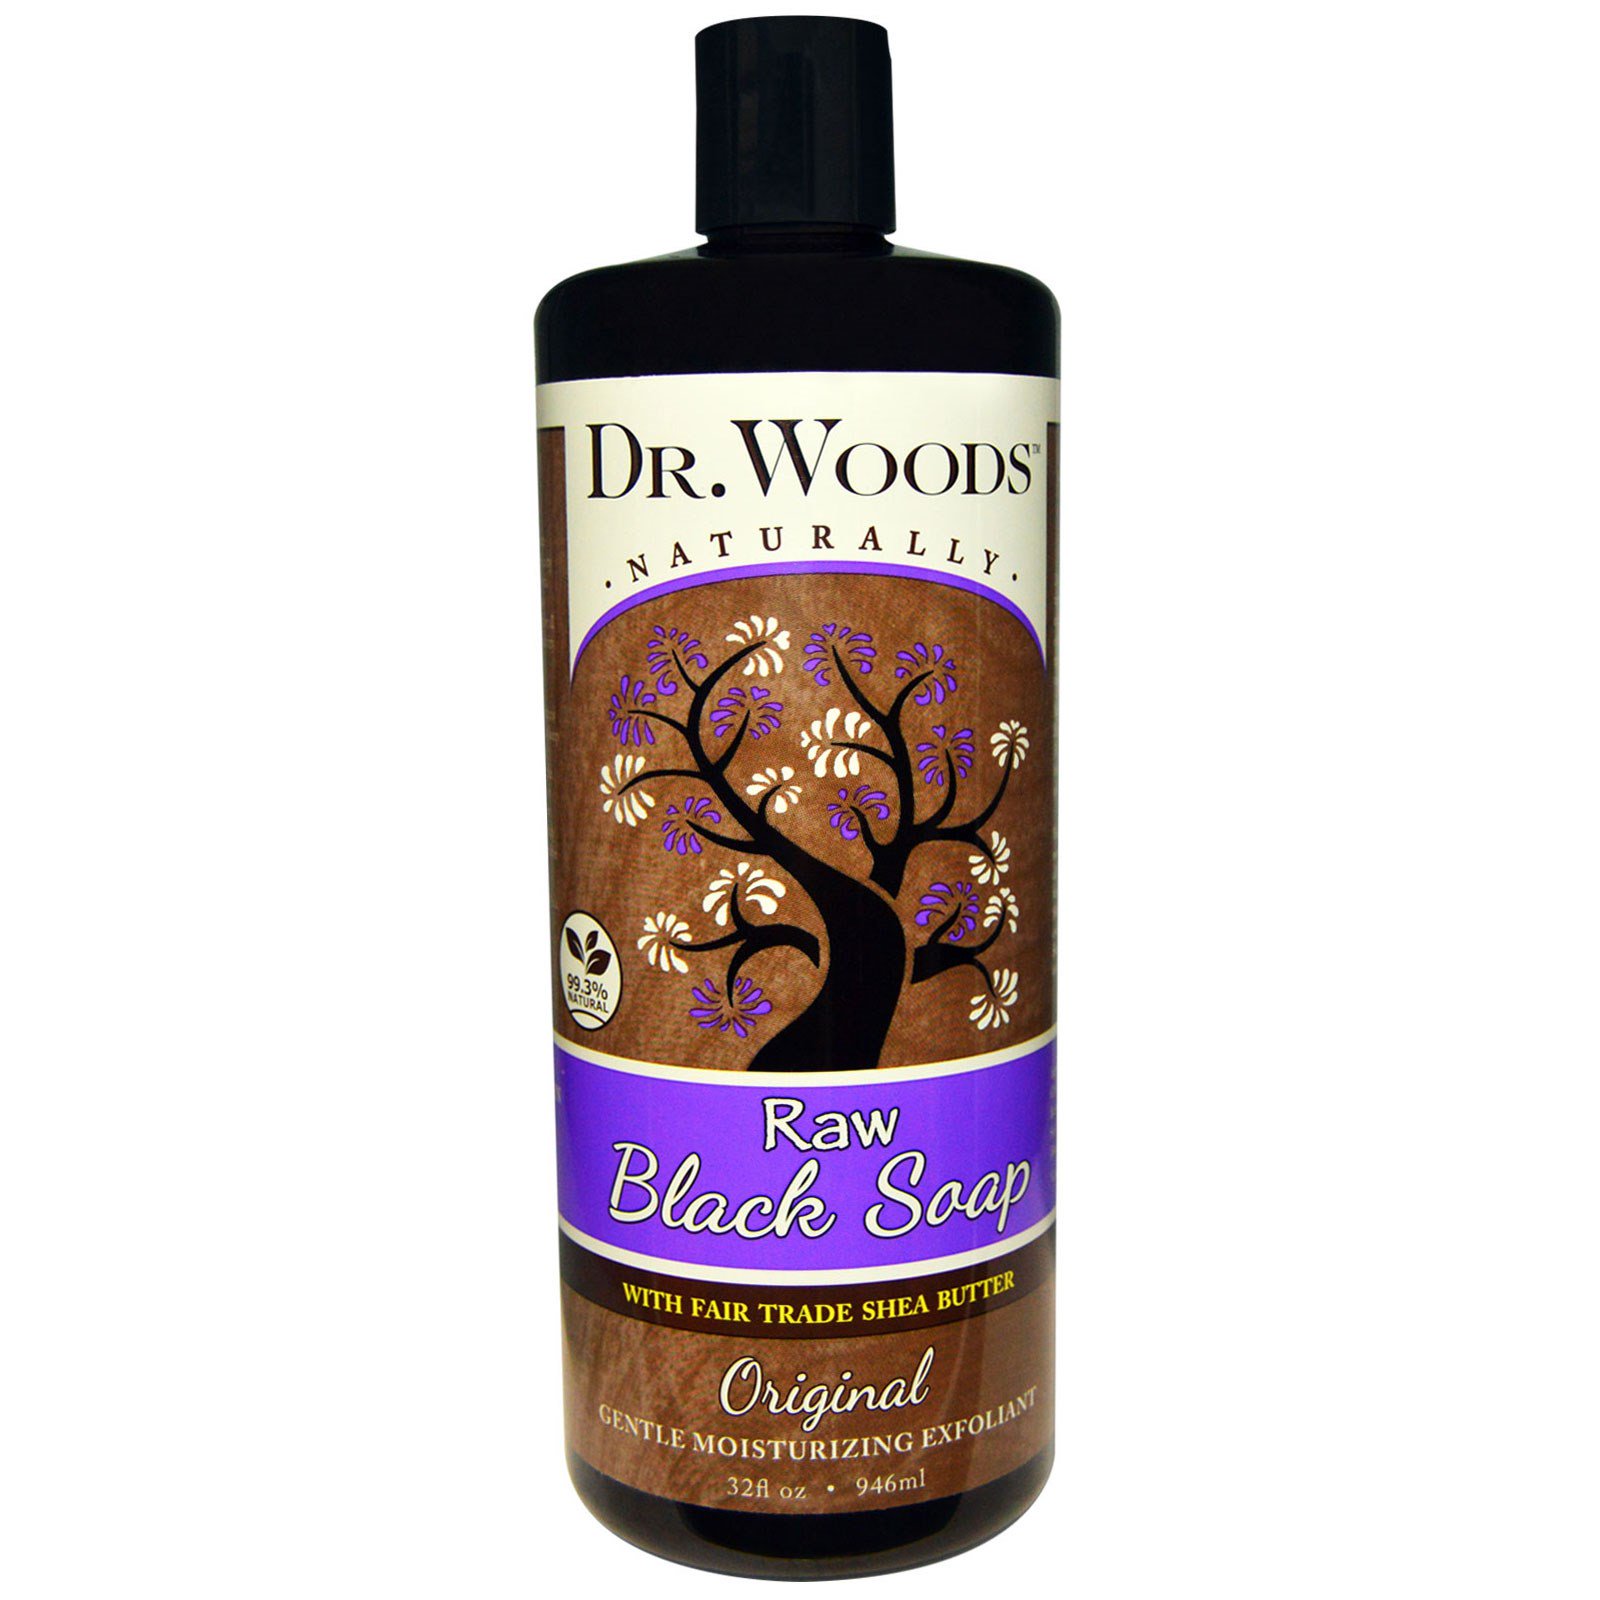 Dr. Woods Raw Black Soap with Fair Trade Shea Butter 